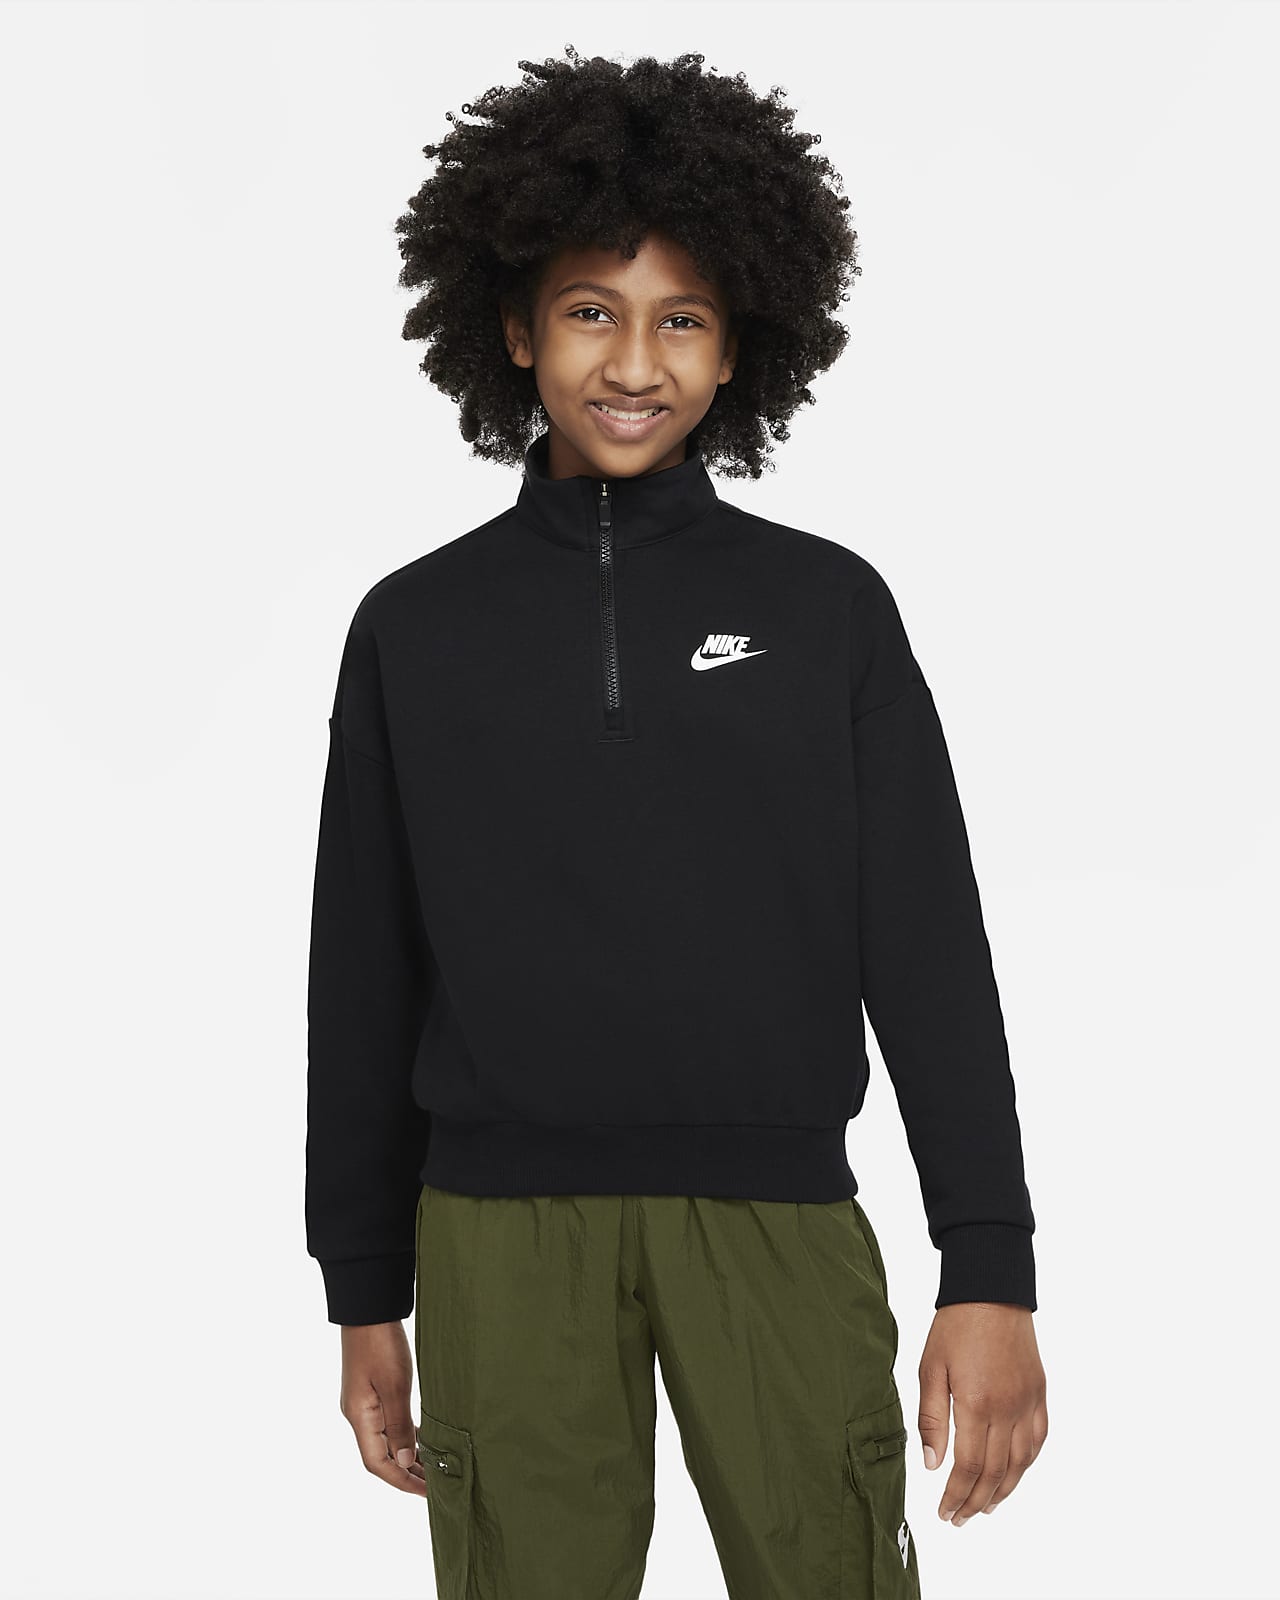 https://static.nike.com/a/images/t_PDP_1280_v1/f_auto,q_auto:eco/aa8cc8a6-caef-4a00-8ef0-2c47fae270df/sportswear-club-fleece-older-1-2-zip-top-GwtvCj.png